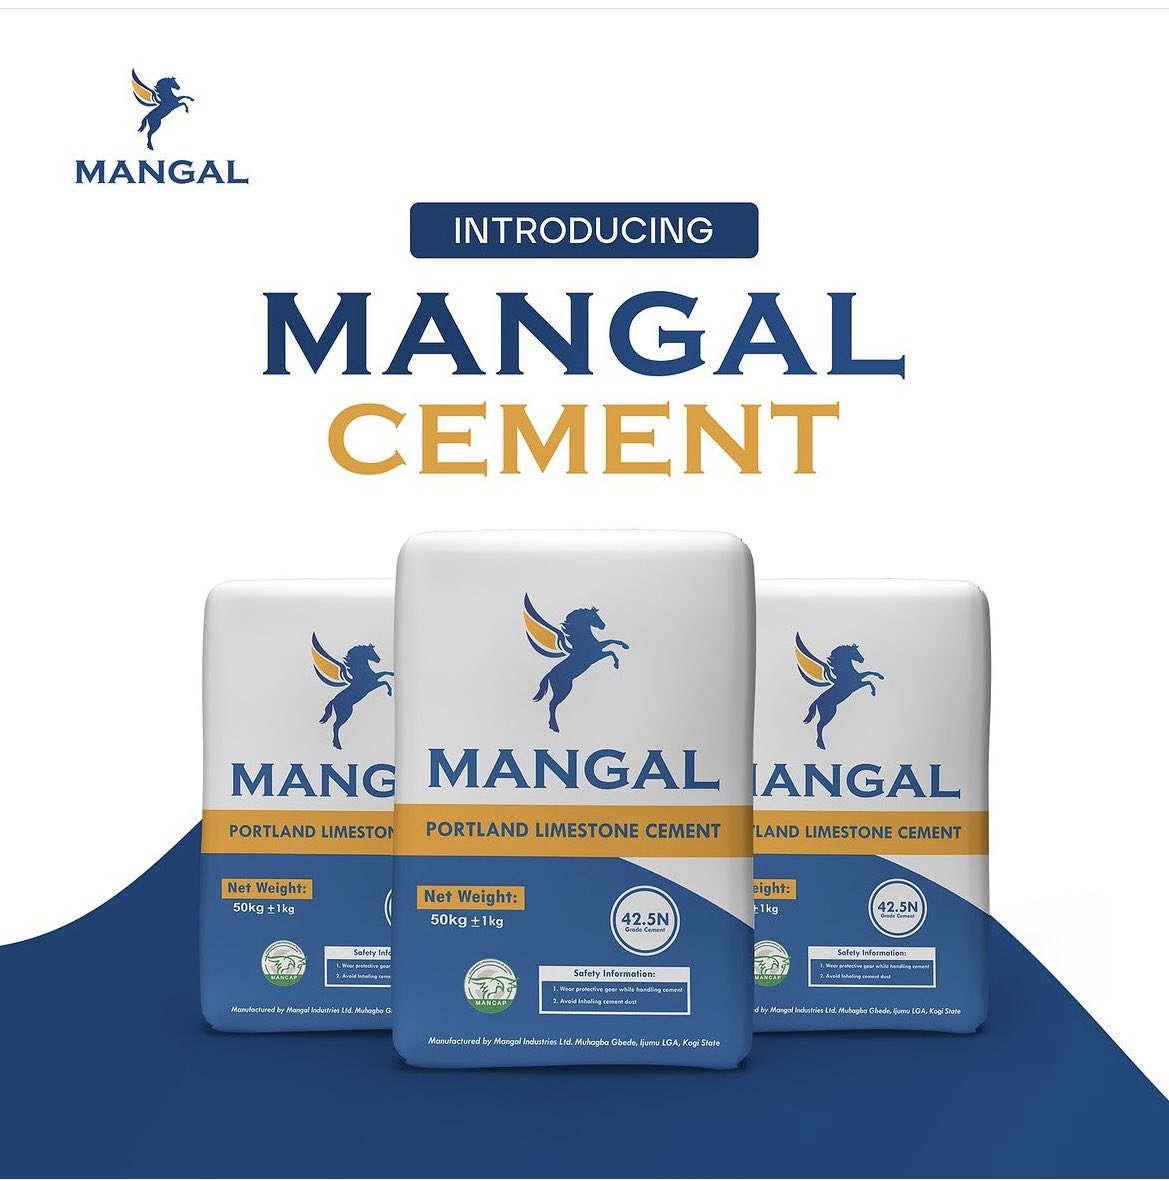 Introducing Mangal Cement. This March, let's lay the foundation for success and build dreams that touch the sky. Happy New Month from Mangal Cement!